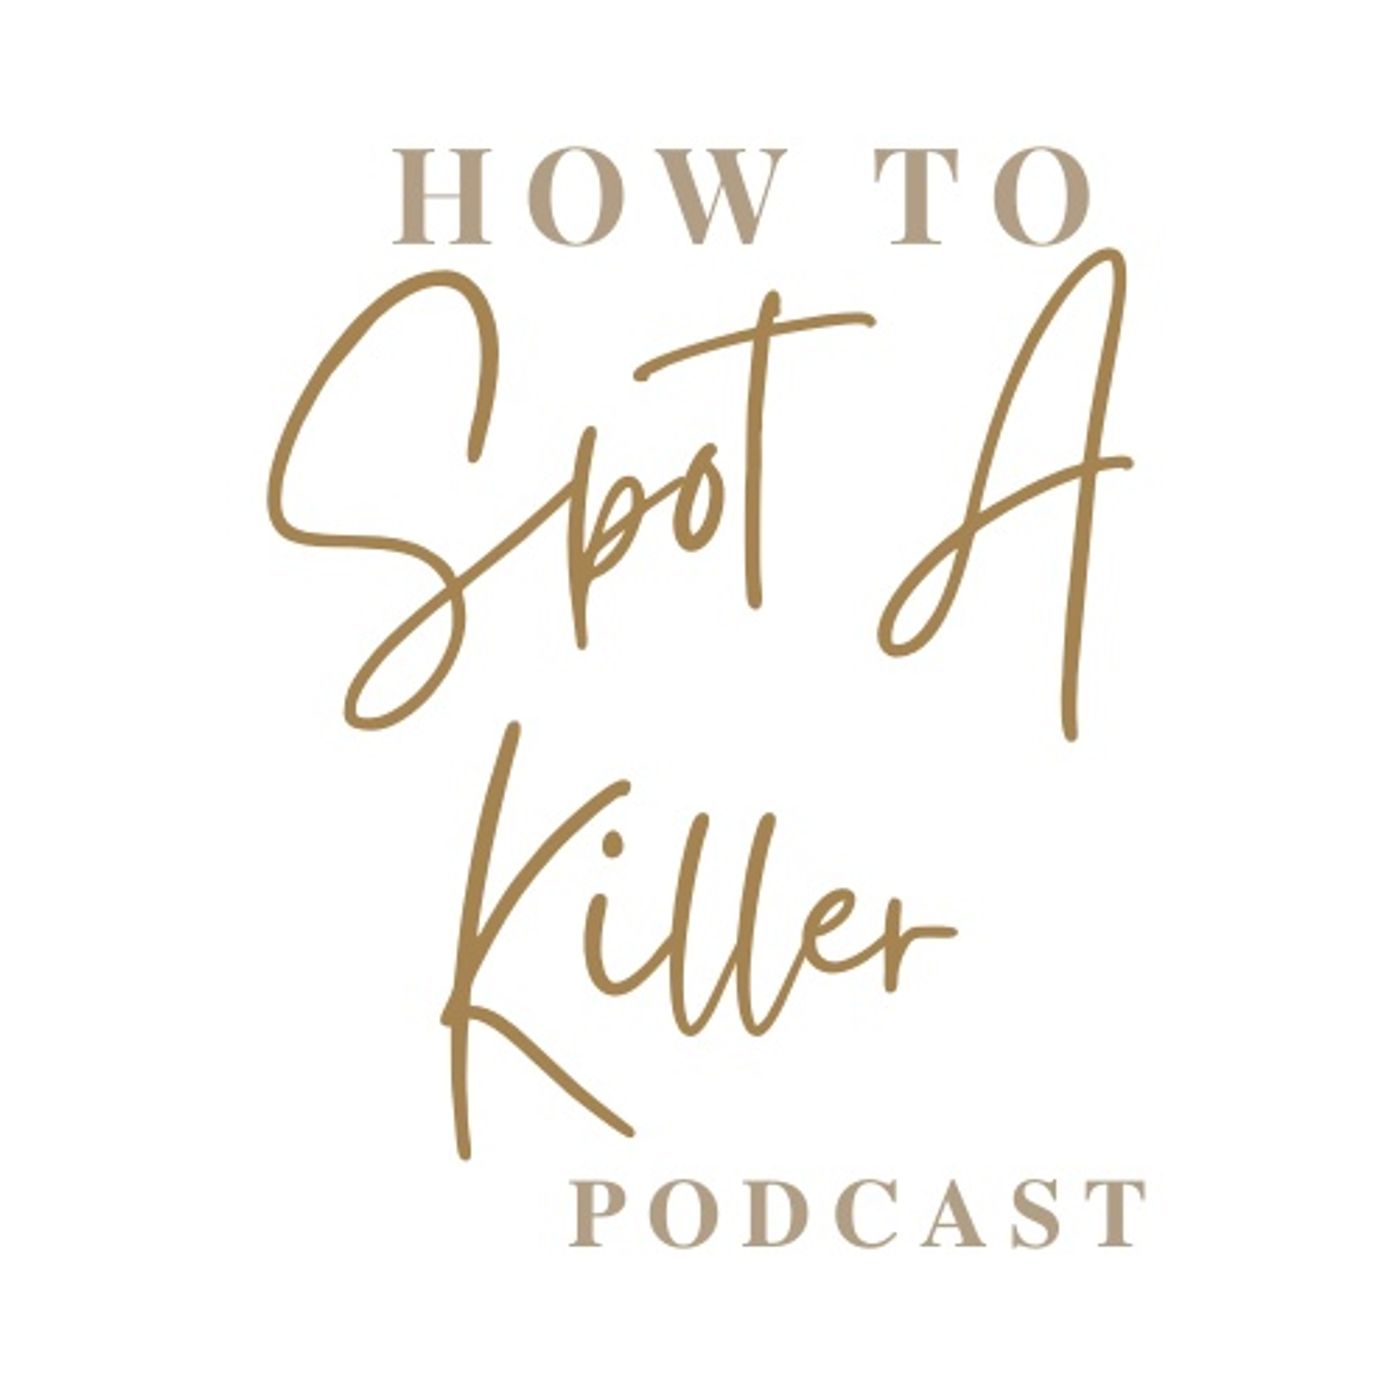 The Cleveland Strangler – Anthony Sowell by How to Spot a Killer